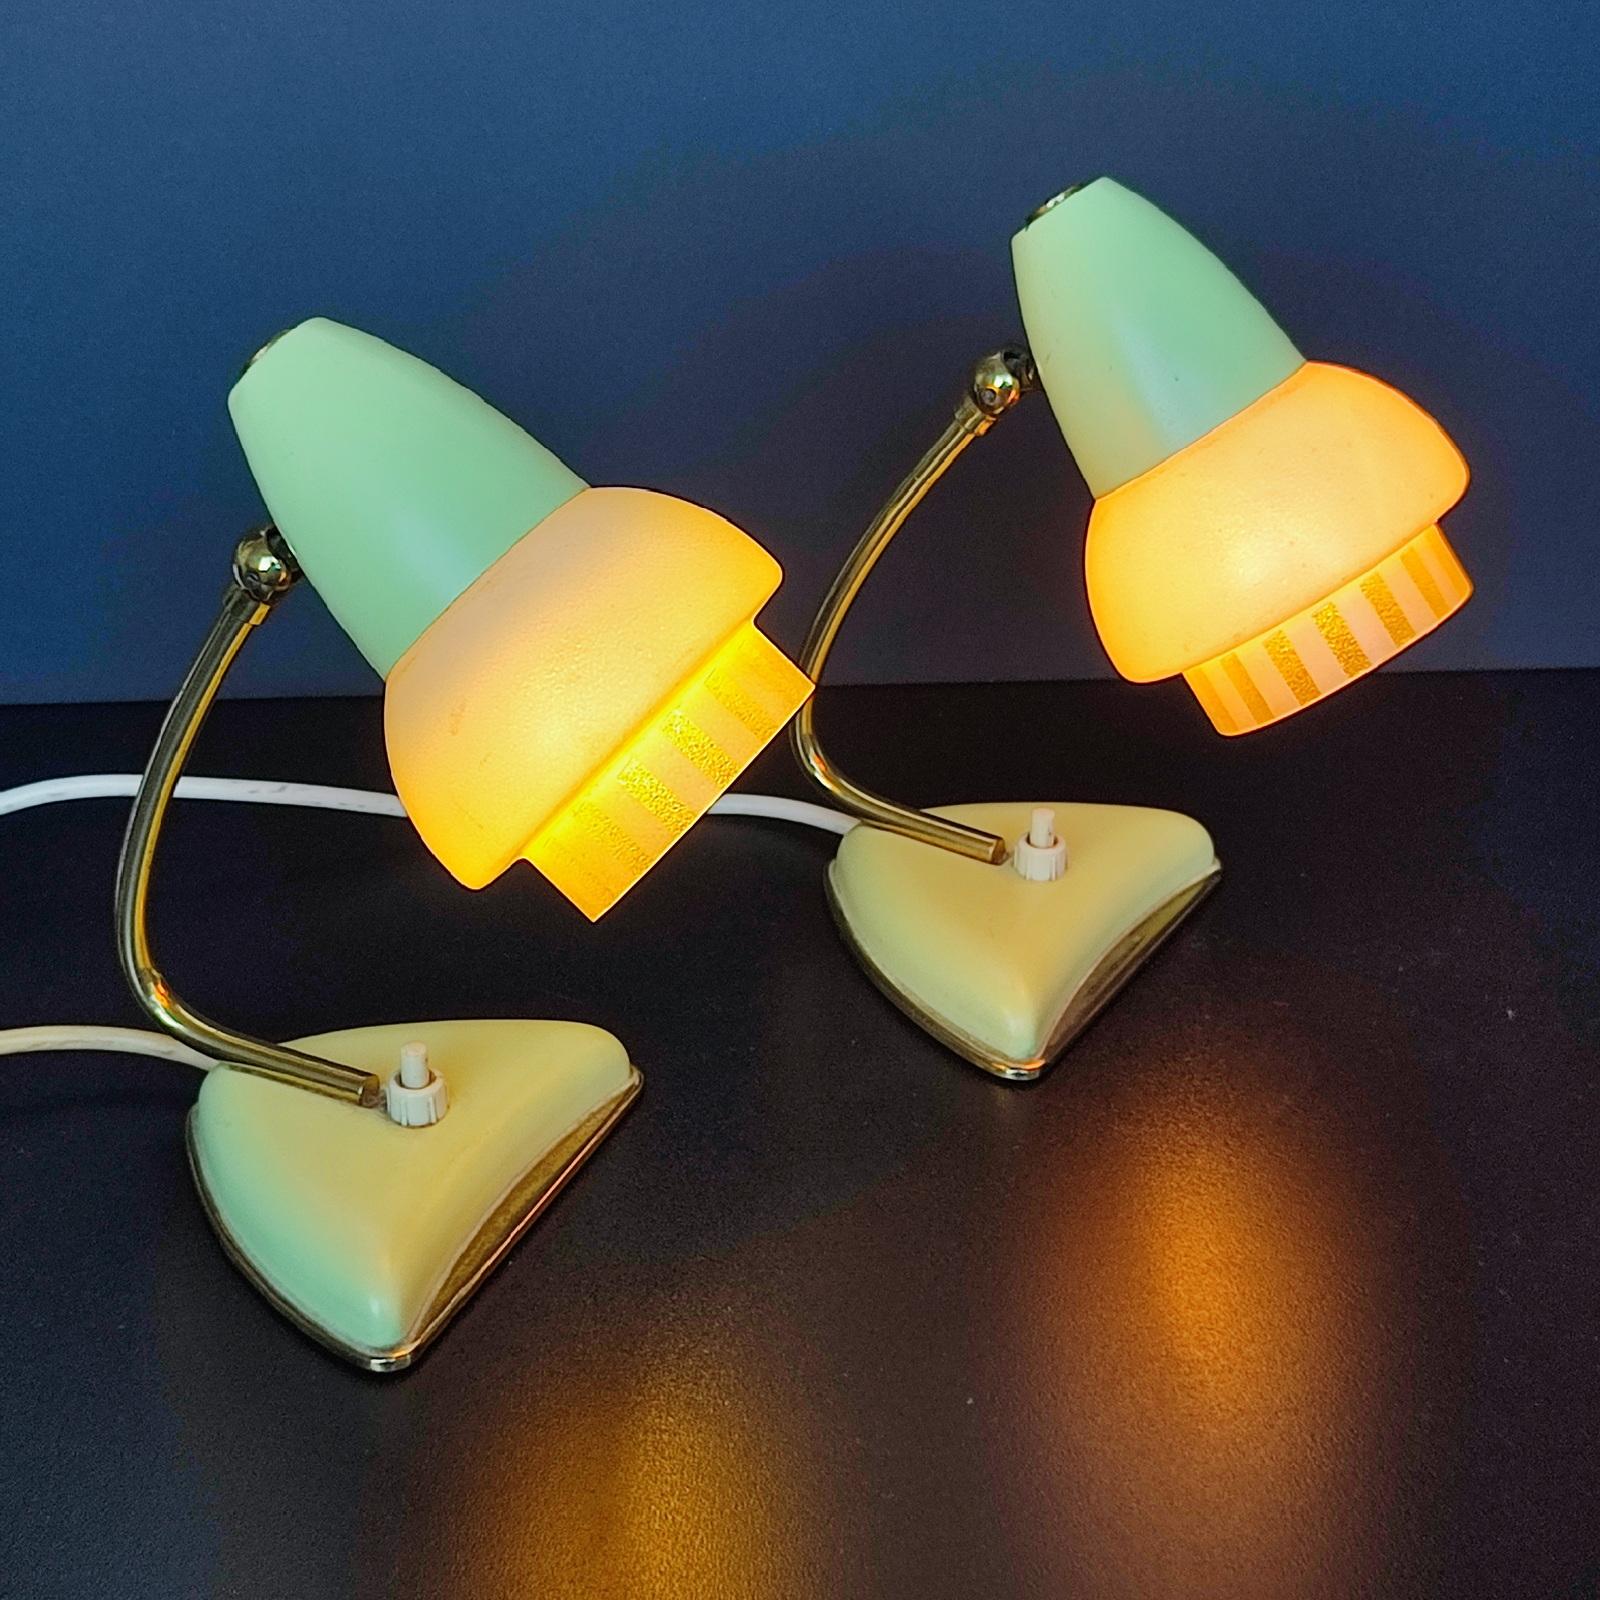 Pair of Lacroix Table Lamps from the 1940s – 1950s.
Metal or Brass-plated metal parts. Pistachio Yellow-green metal shades with frosted glass lampshade lower decorated with pistachio glass etched vertical stripes. Each lamp takes an E14 bulb. The